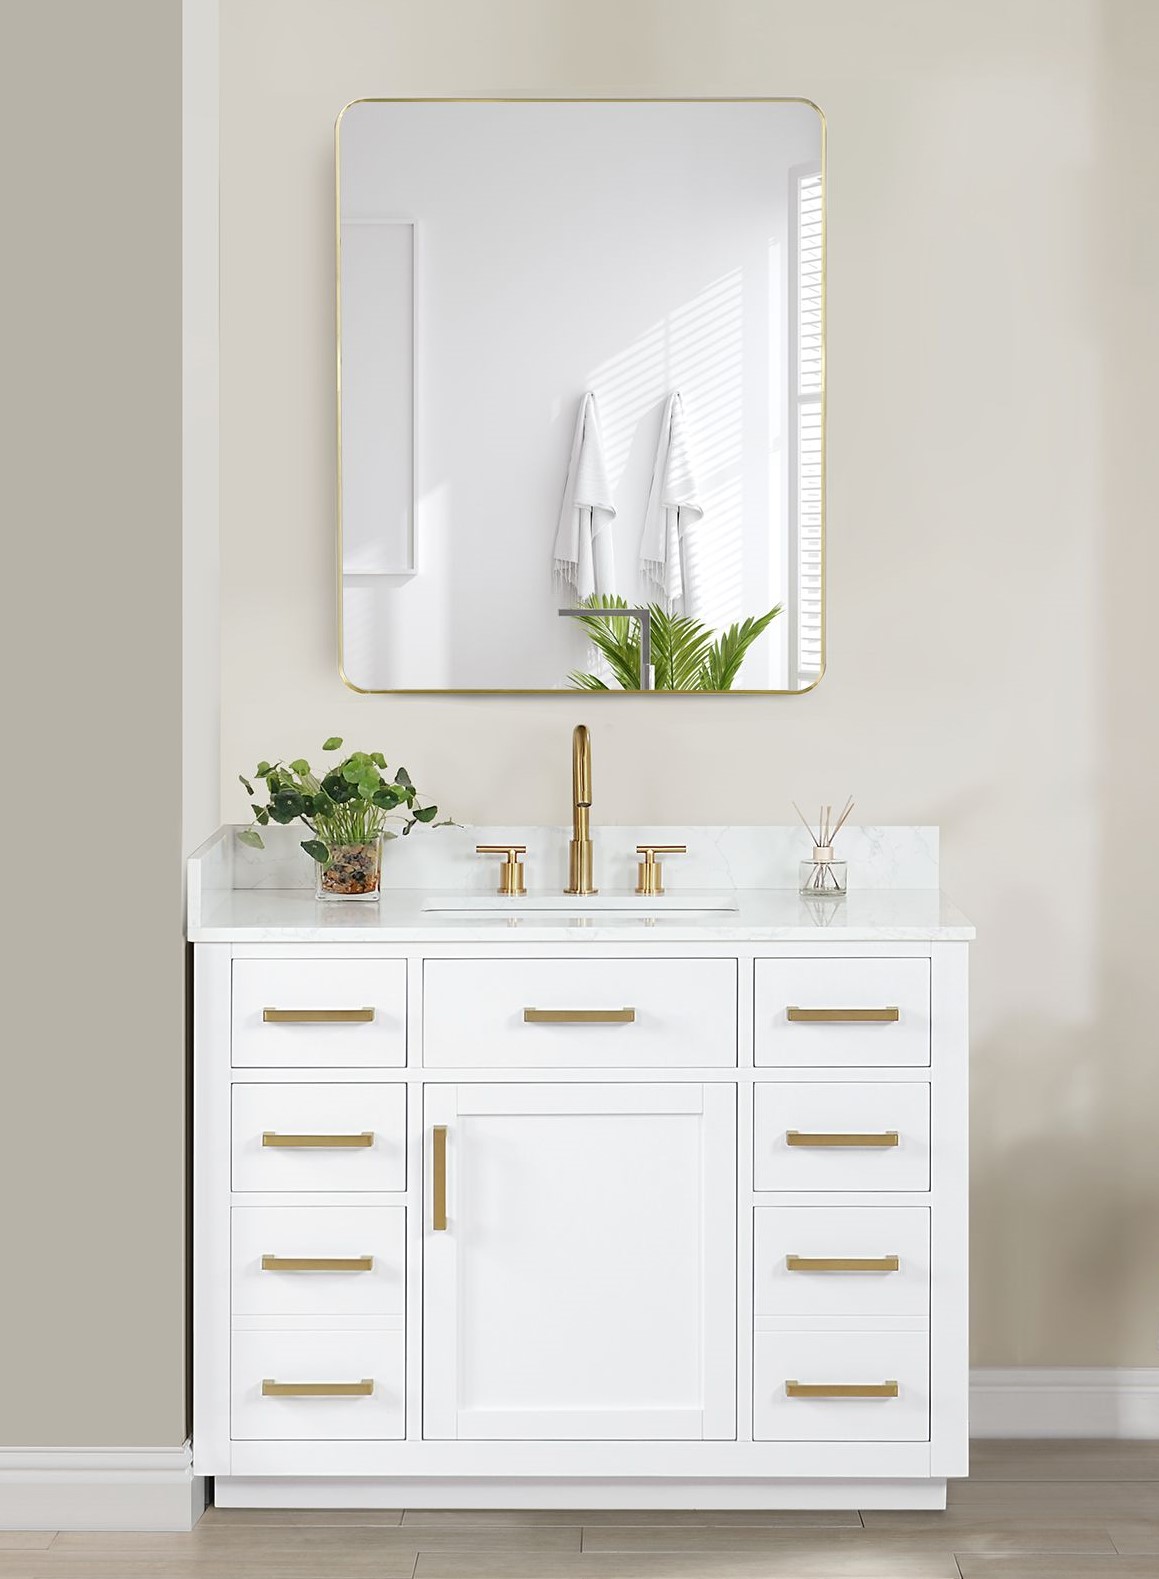 Issac Edwards 42" Single Bathroom Vanity in White with Grain White Composite Stone Countertop with Mirror